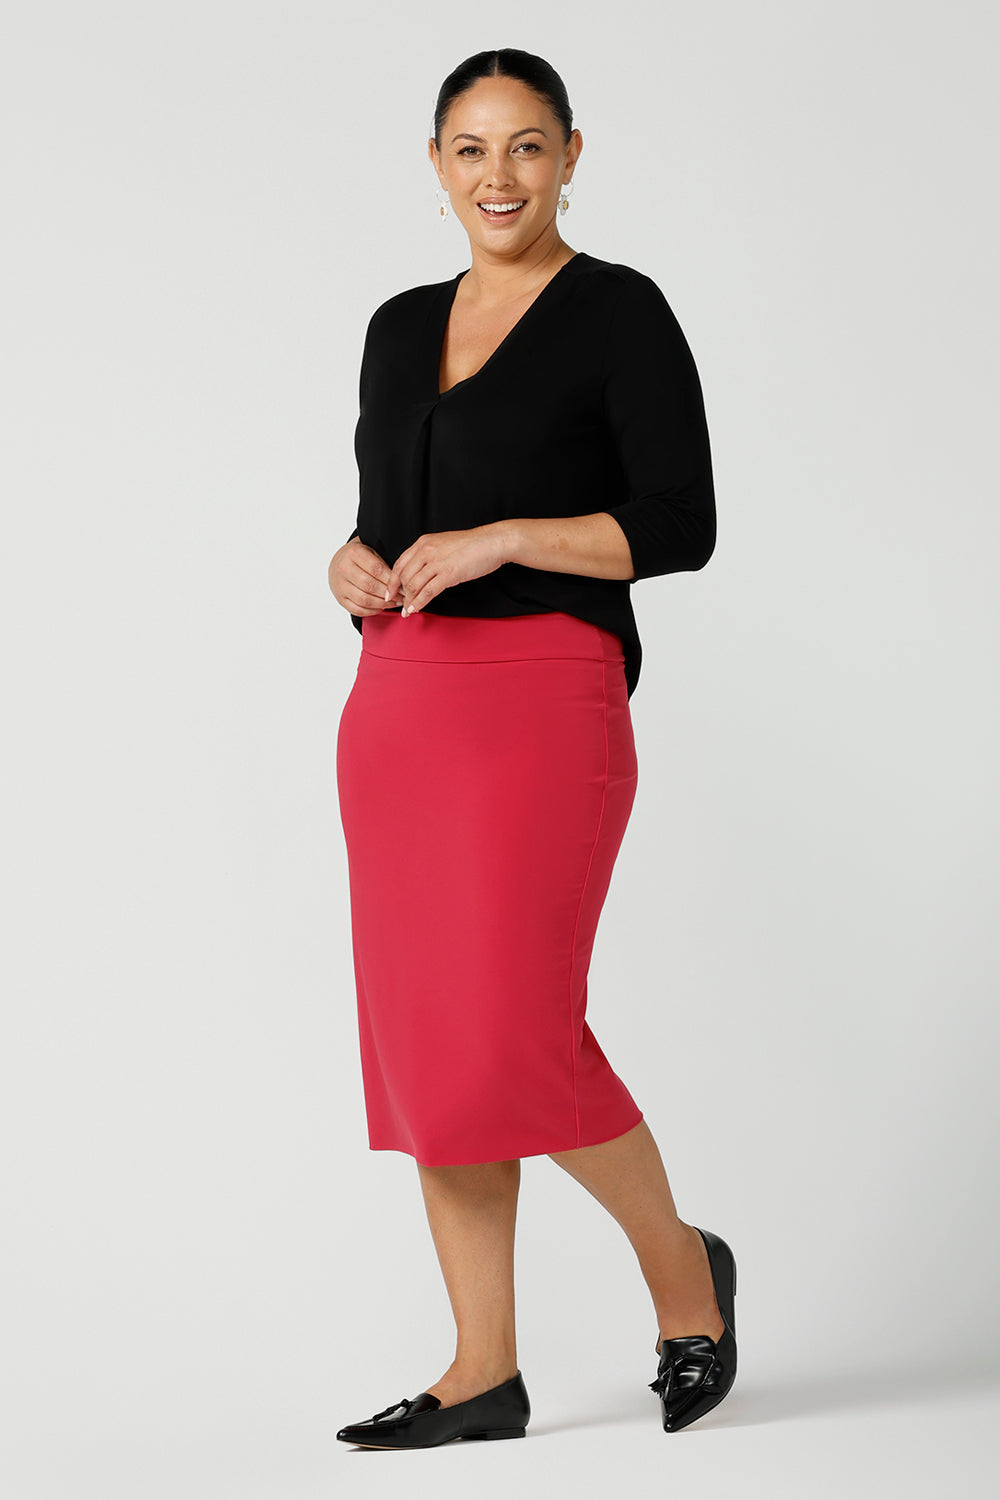 Black Bamboo pleat front top on a size 12 curvy woman. With a 3/4 sleeve and high-low hem, this top is a great women’s work top for corporate wear. Styled back with a fuchsia tube skirt. Designed and made in Australia for women sizes 8 - 24. Leina and Fleur.